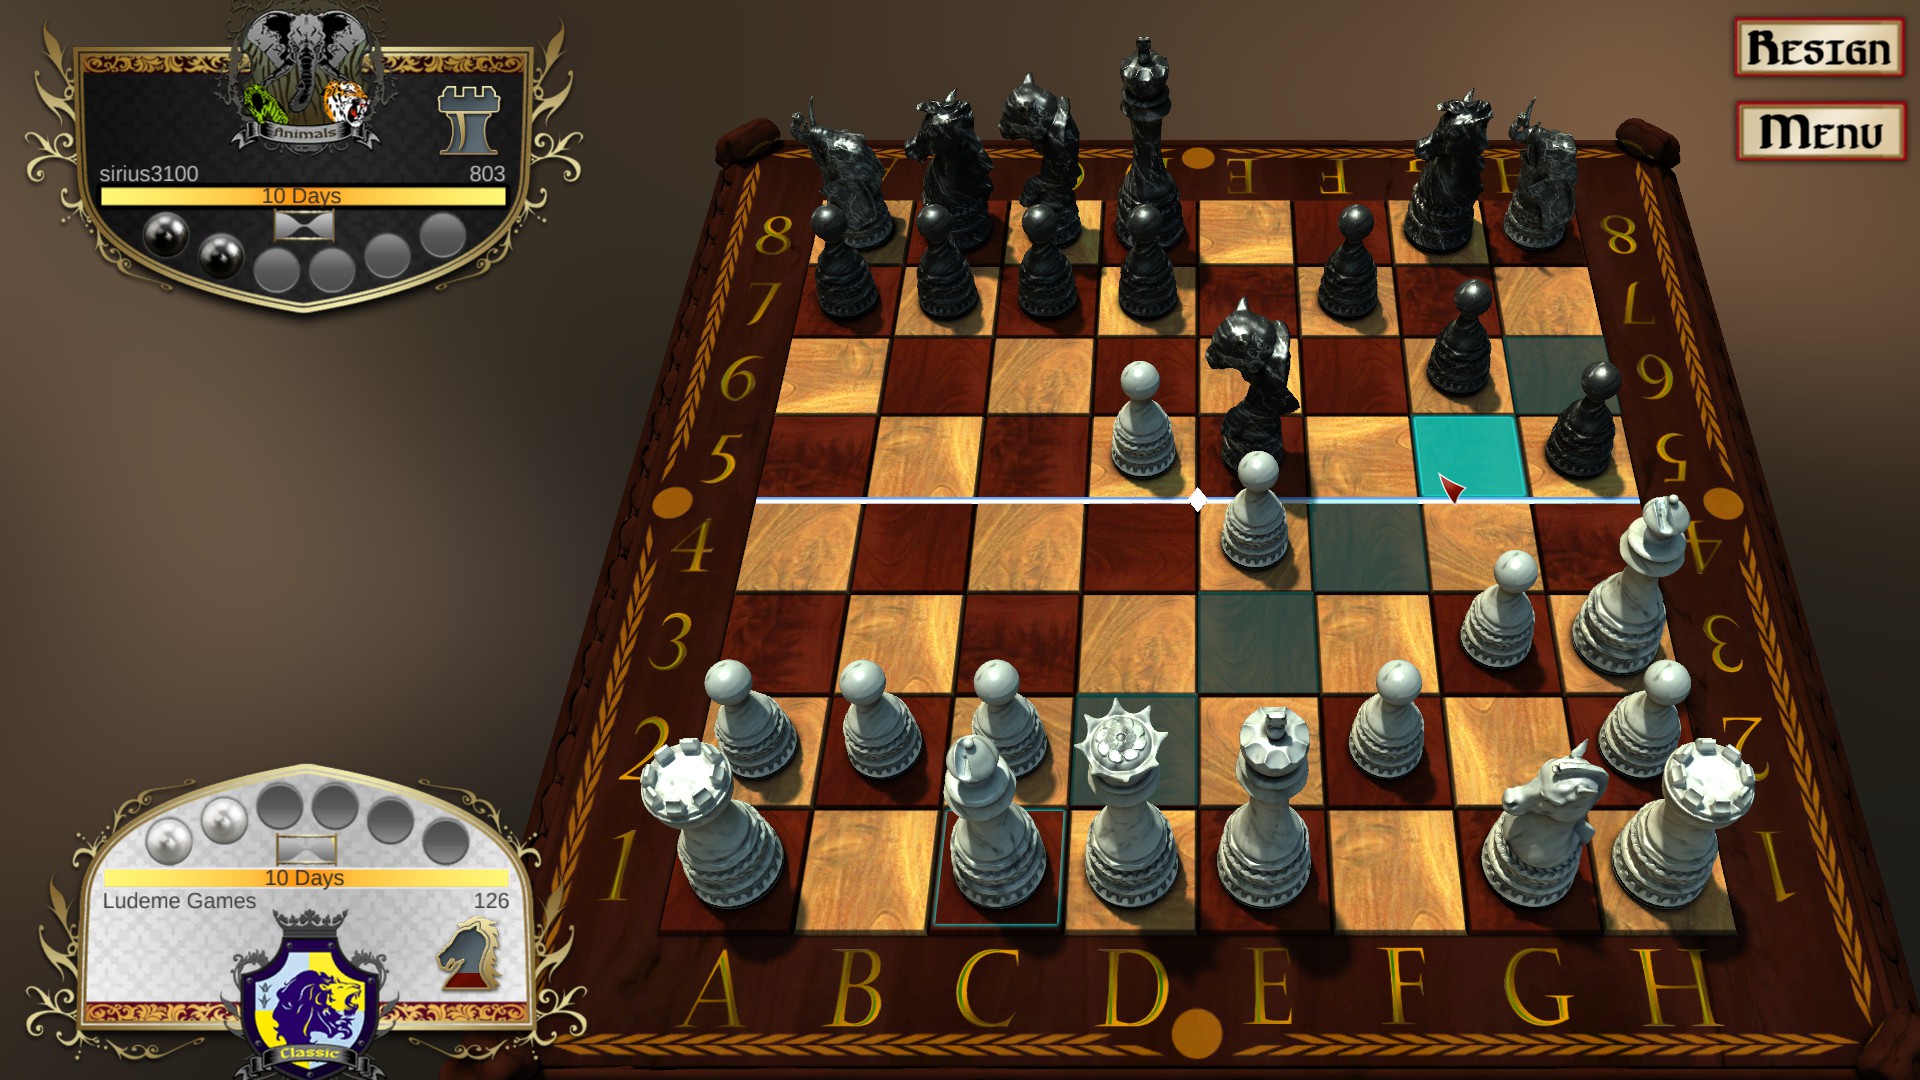 online chess multiplayer computer